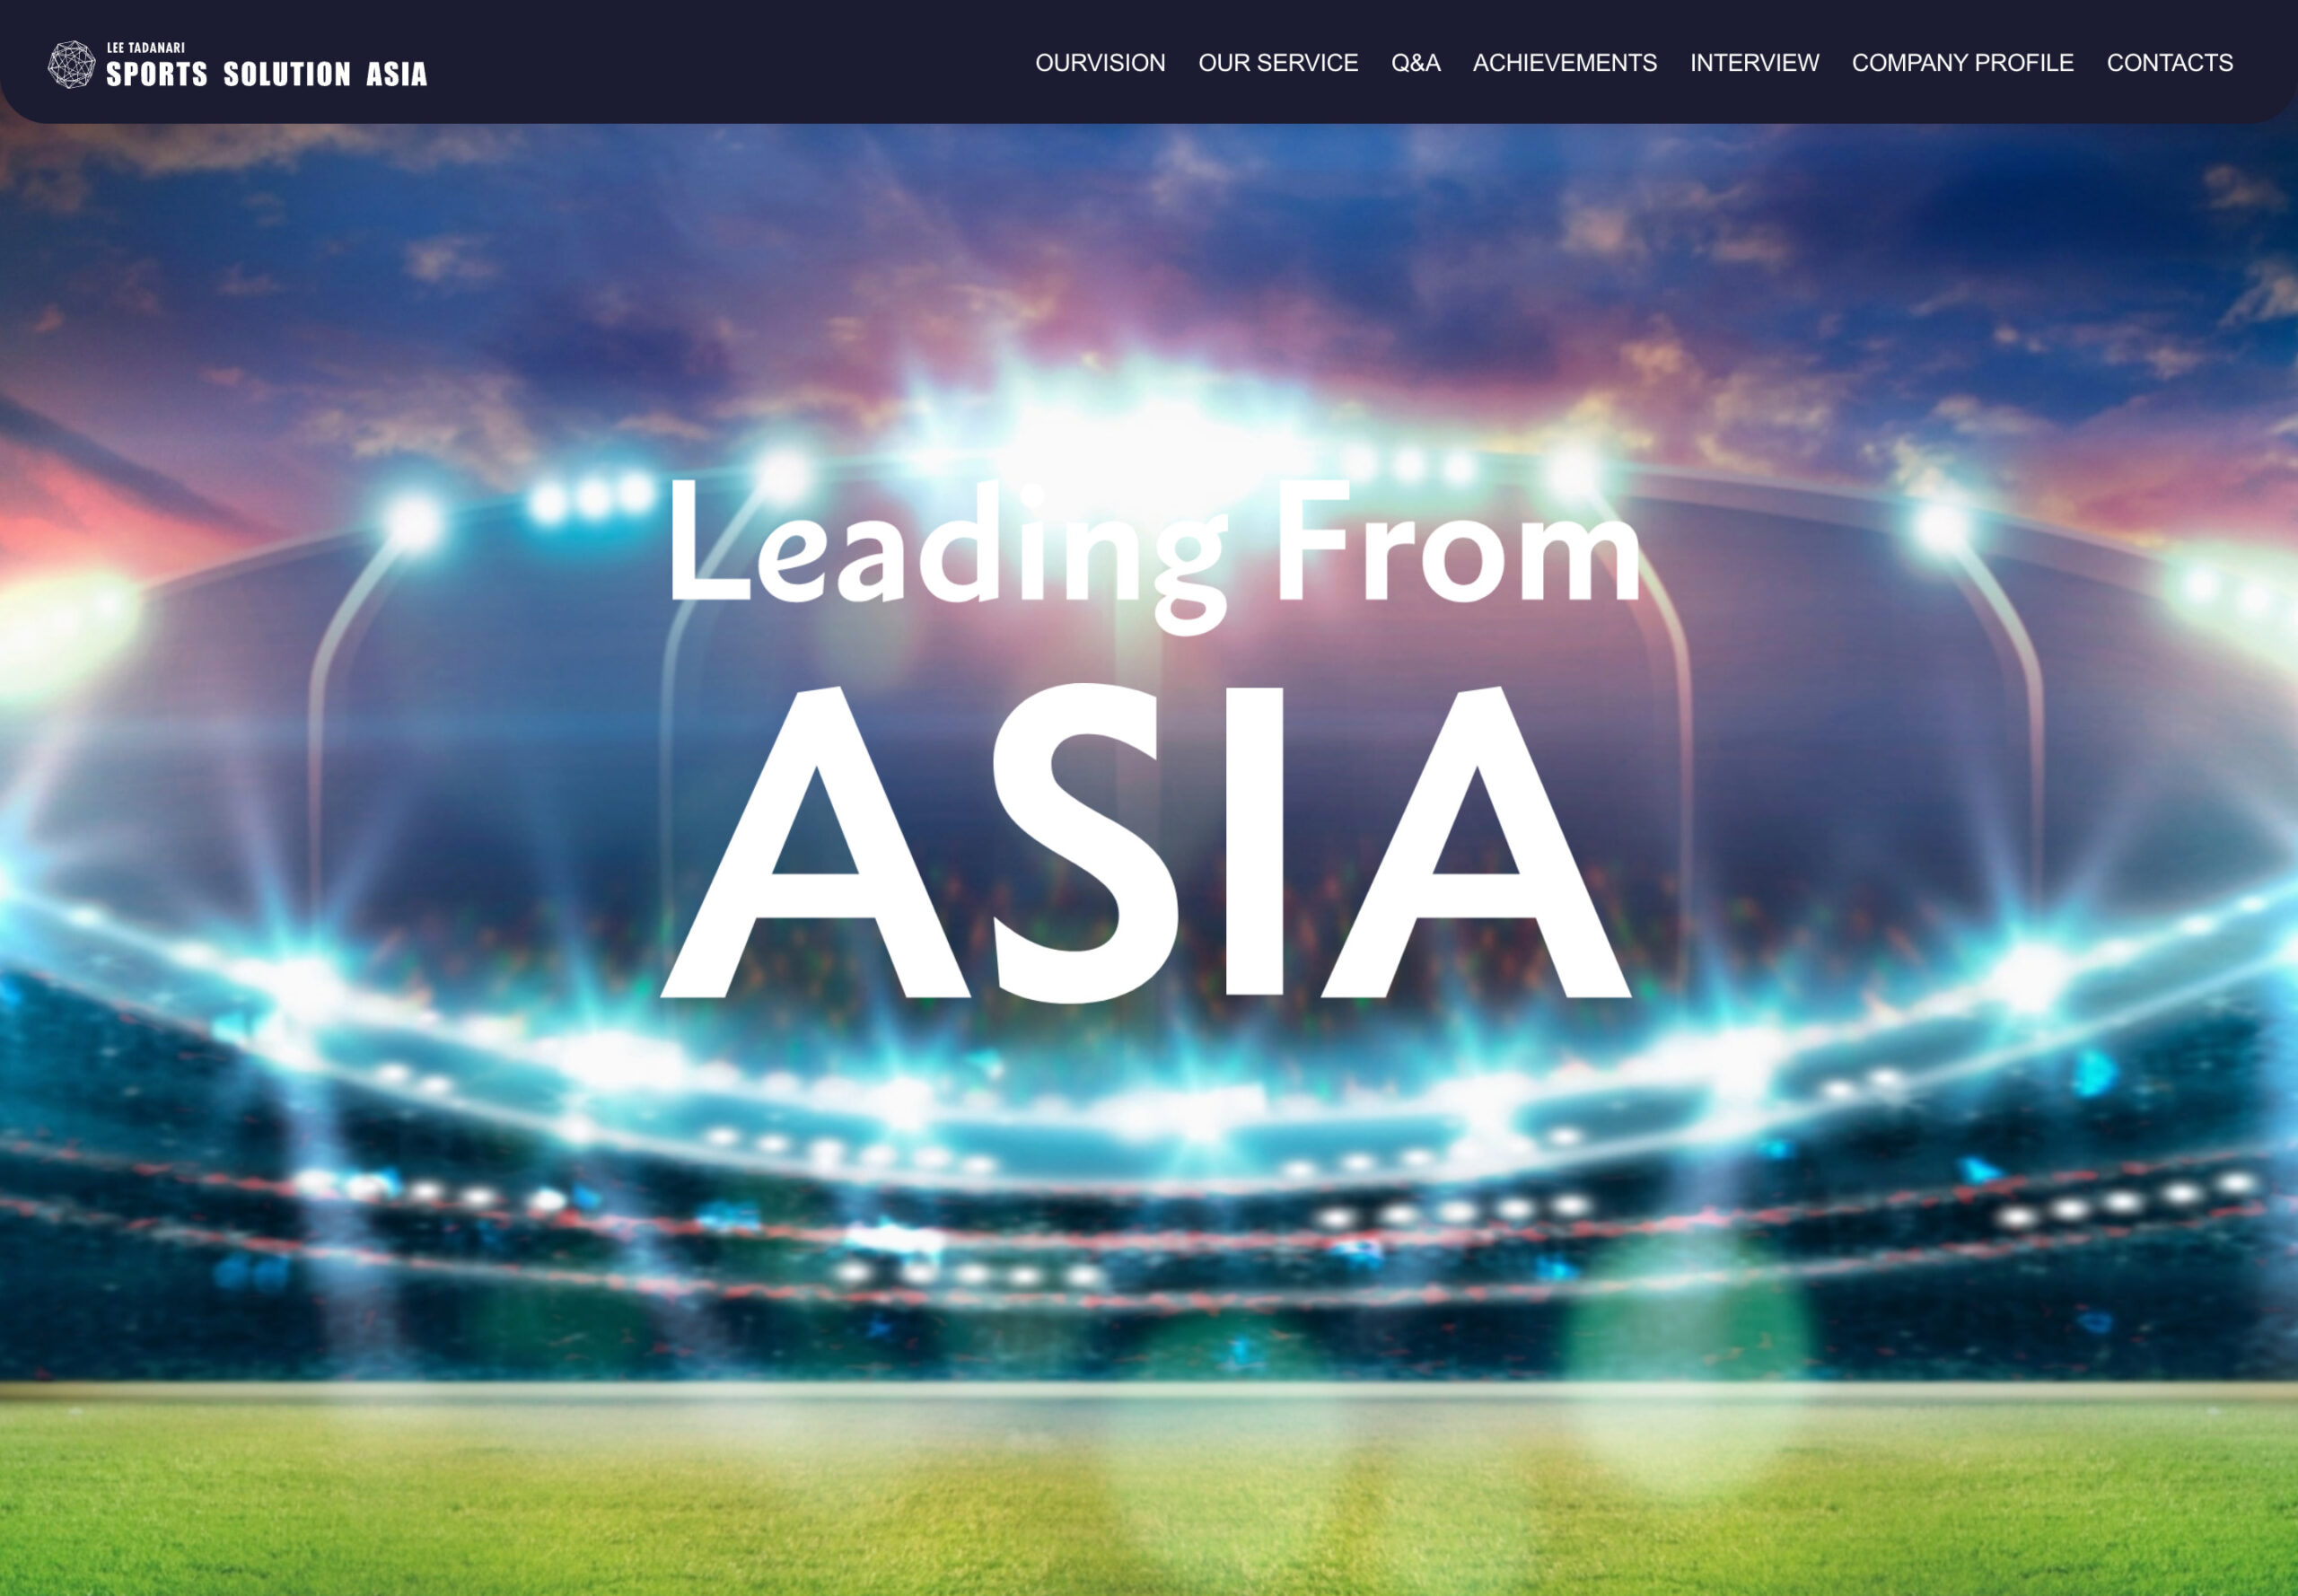 SPORTS SOLUTION ASIA